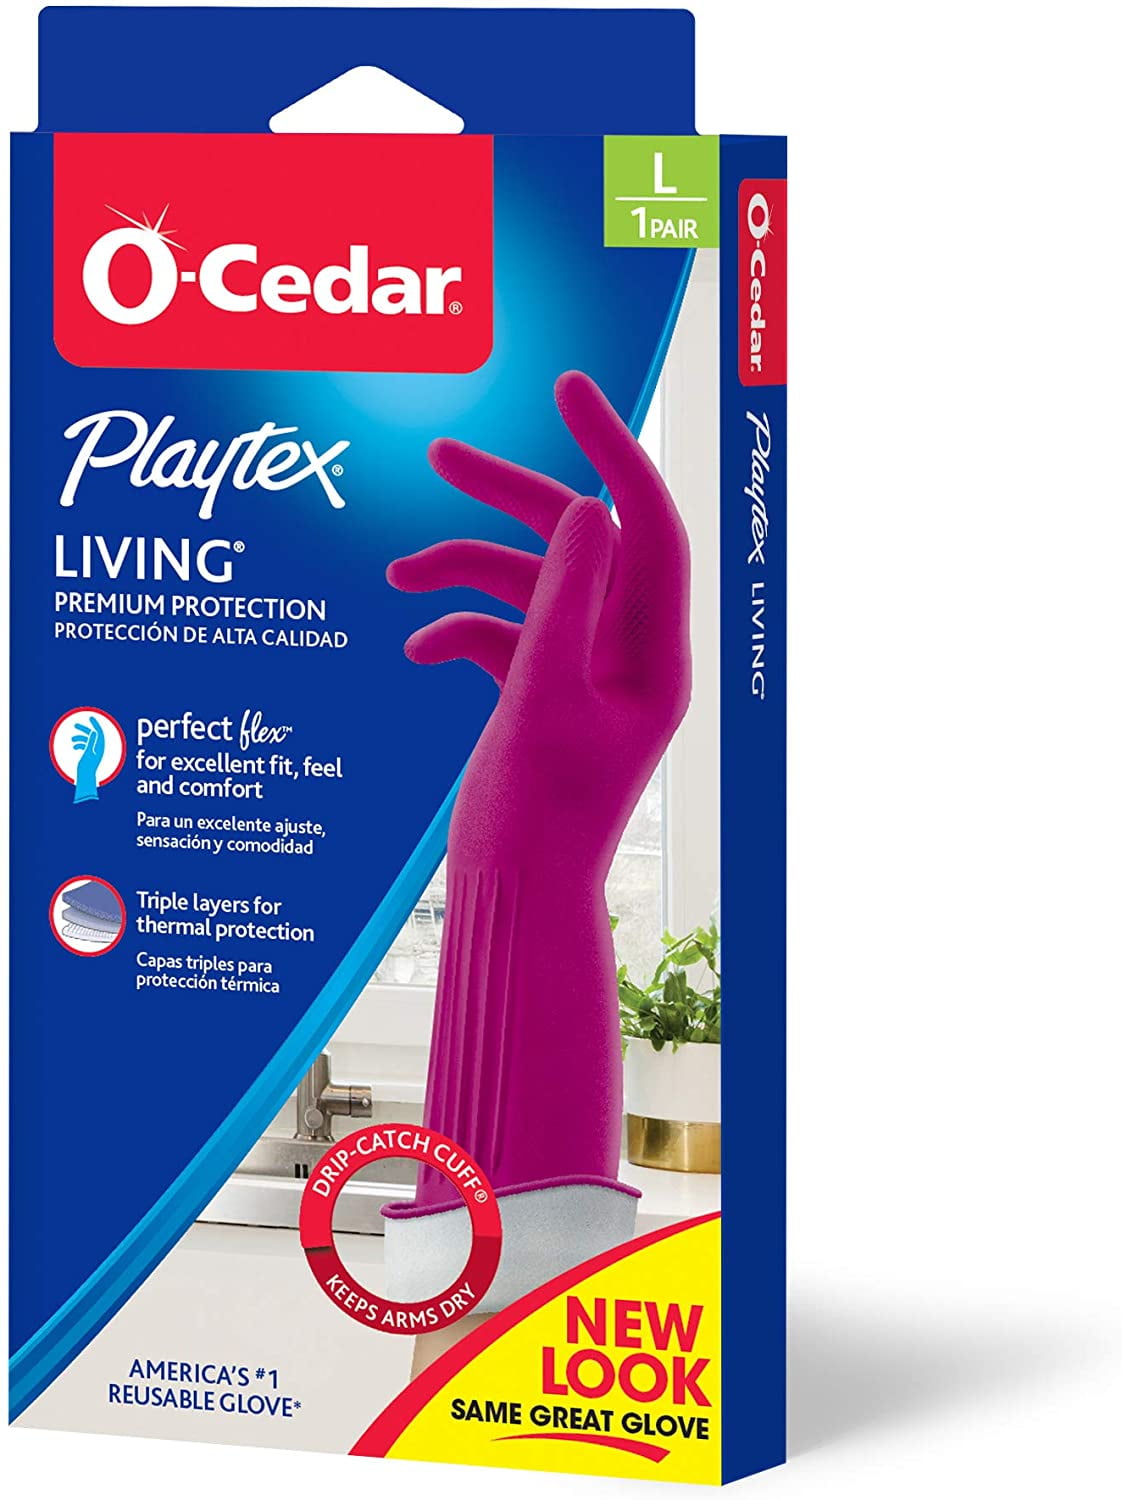 Premium Reusable Latex Gloves Natural Rubber From SriLanka Cleaning,Soft Protect 